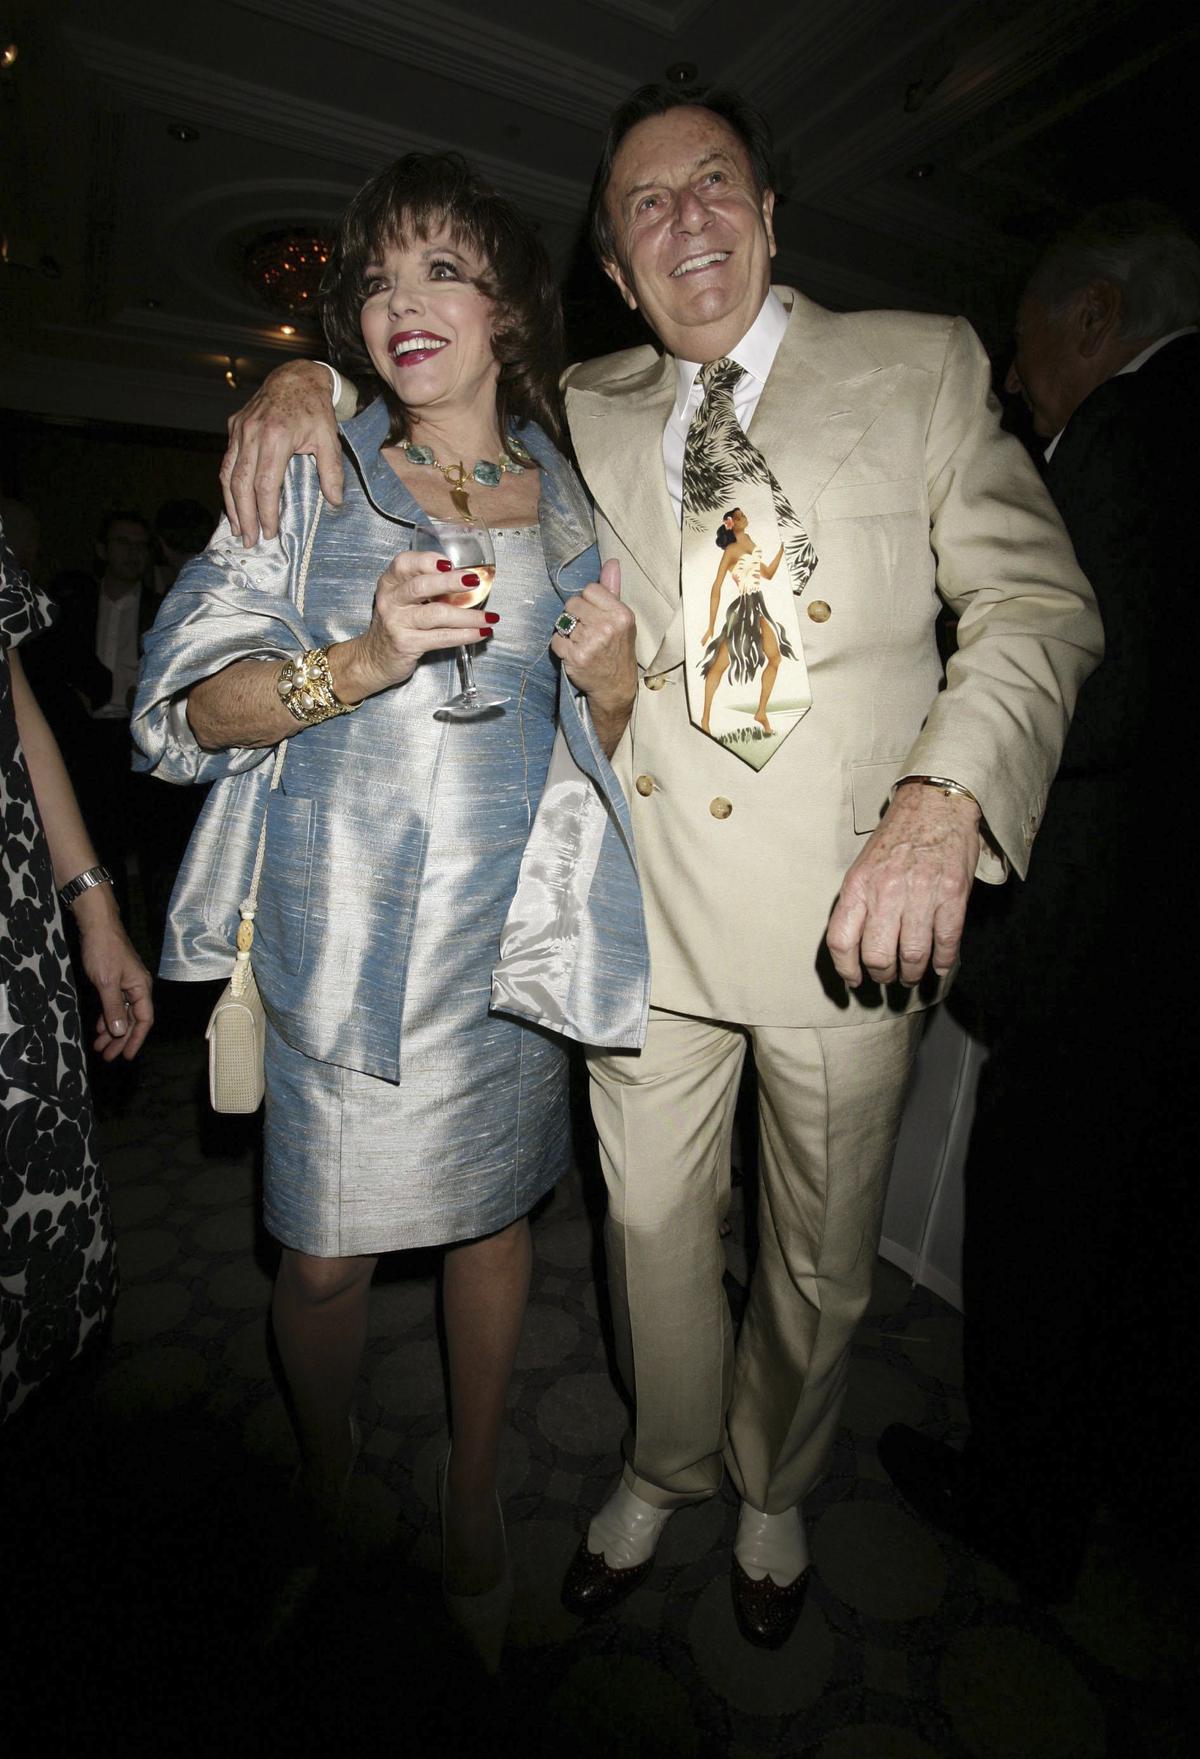 Actress Joan Collins and actor Barrie Humphreys pose during a party to celebrate the 180th anniversary of the weekly political magazine The Spectator held at the Churchill Hyatt Hotel in central London on May 7, 2008. 